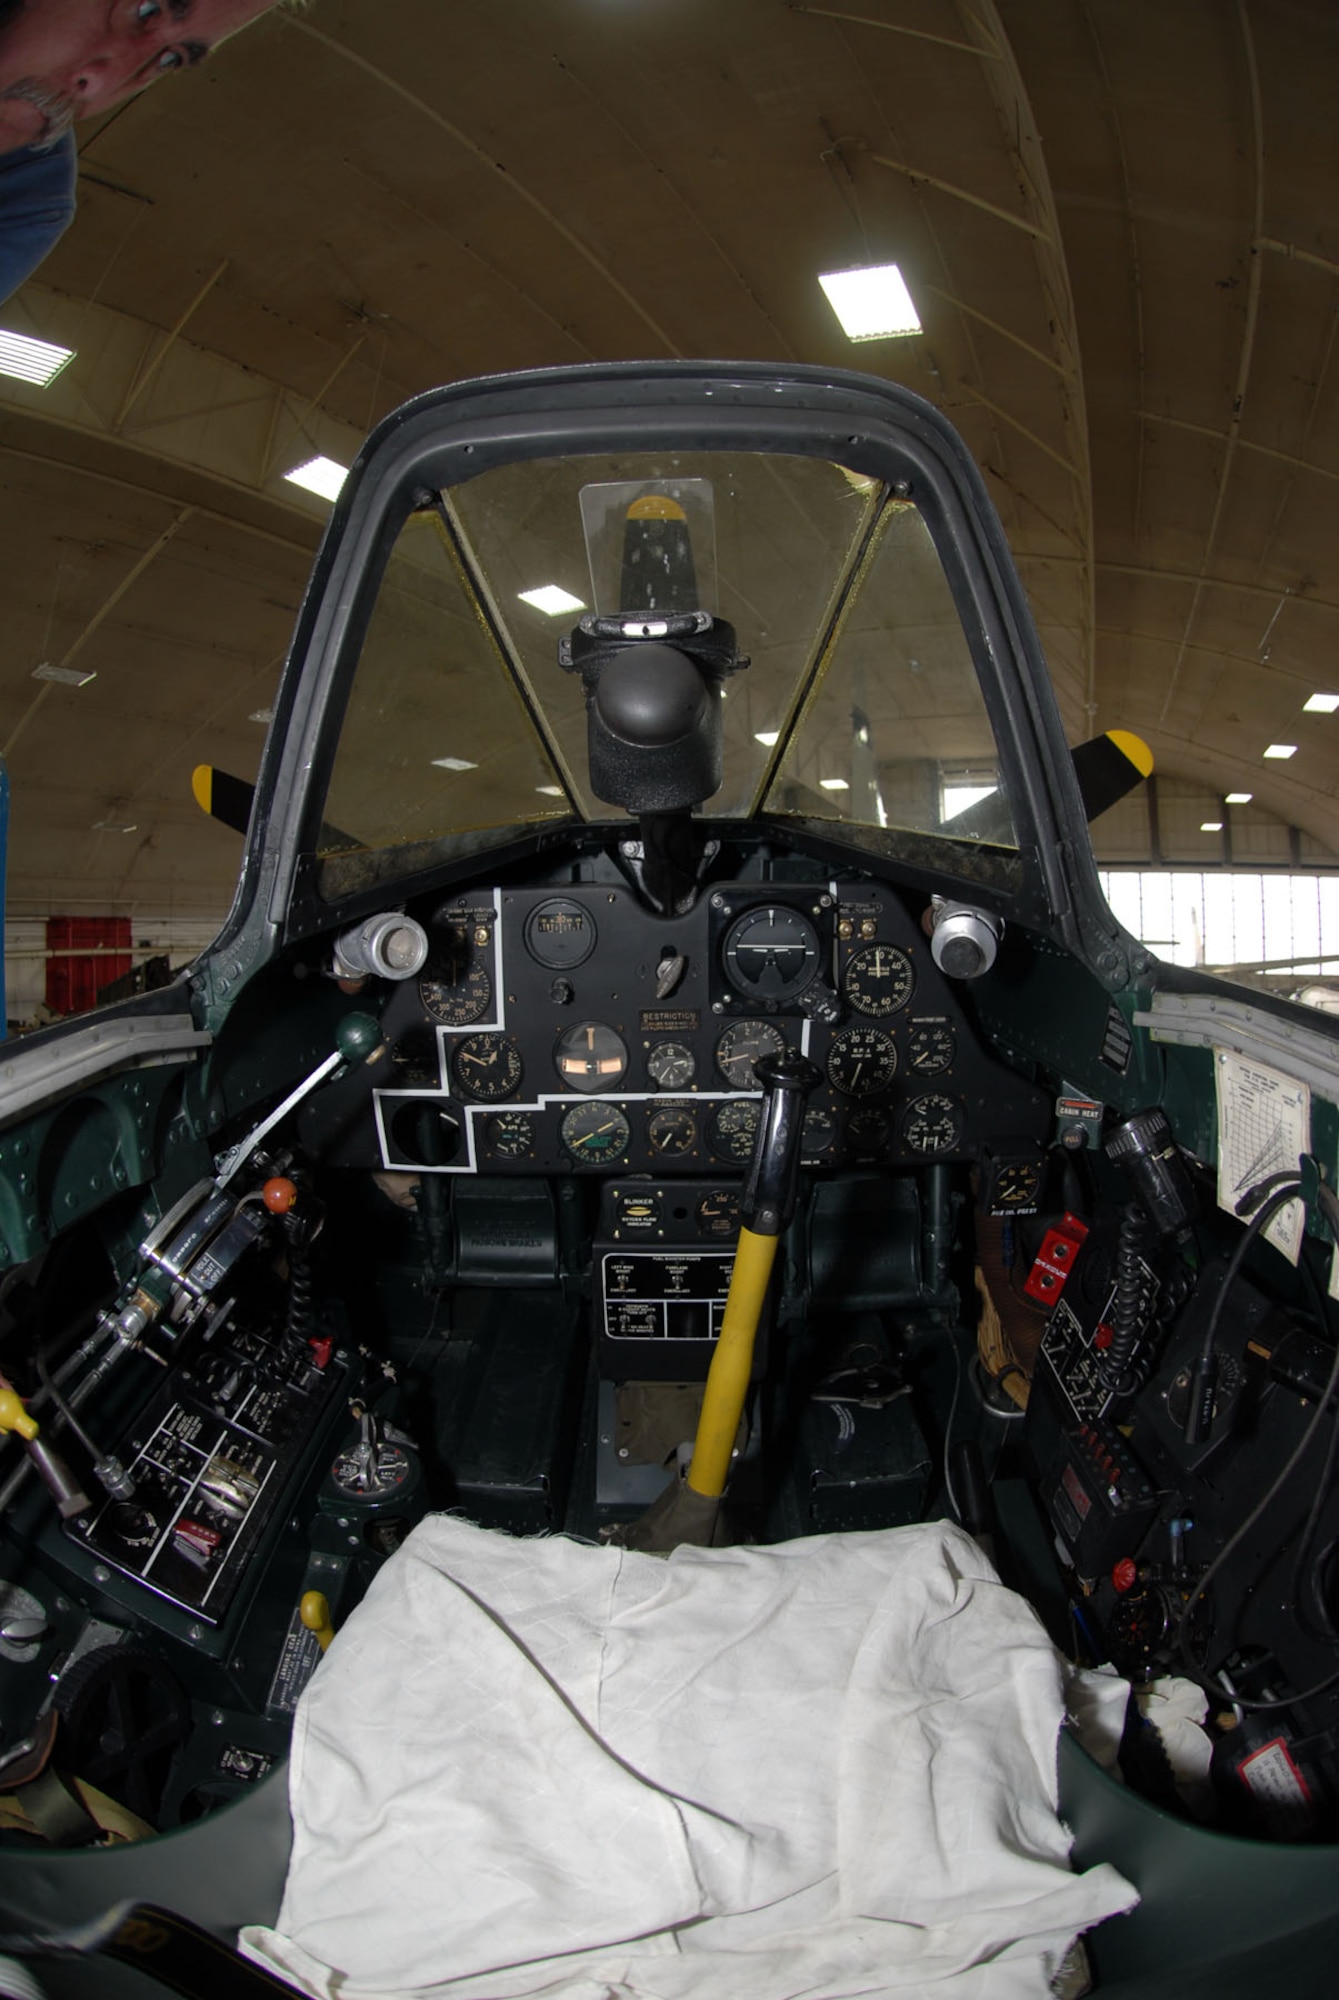 DAYTON, Ohio -- The Fisher P-75A cockpit at the National Museum of the U.S. Air Force. (U.S. Air Force photo)